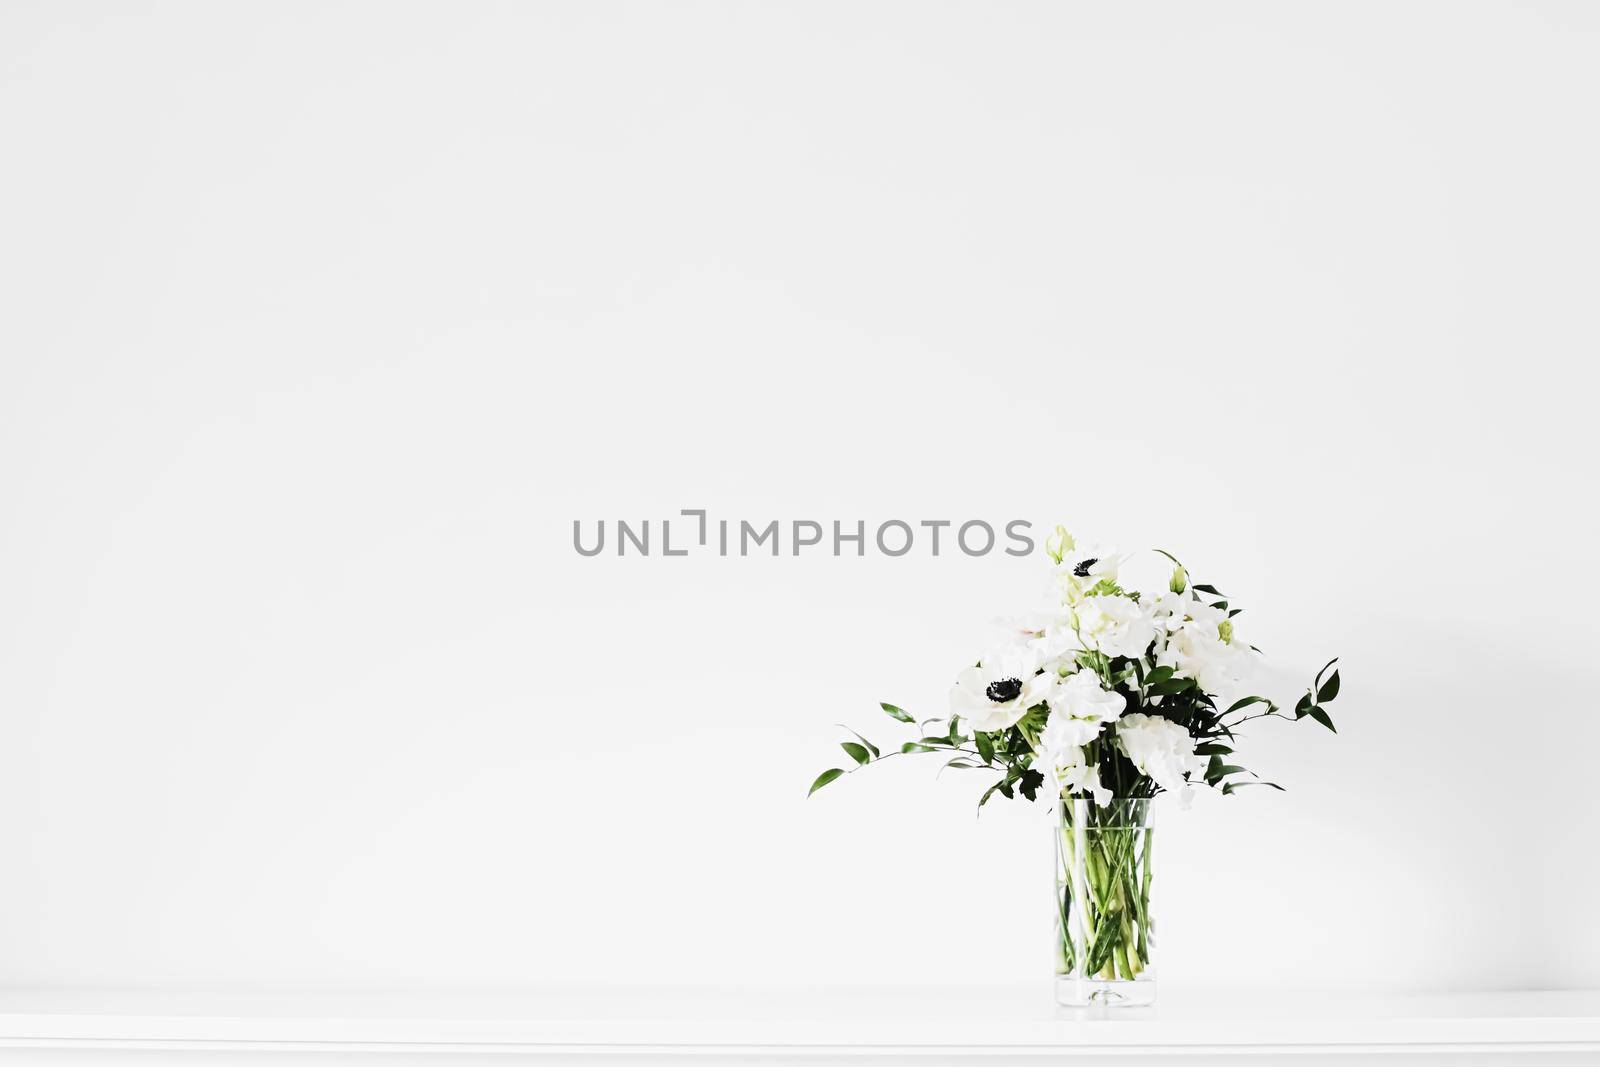 Bouquet of flowers in vase and home decor details, luxury interior design closeup